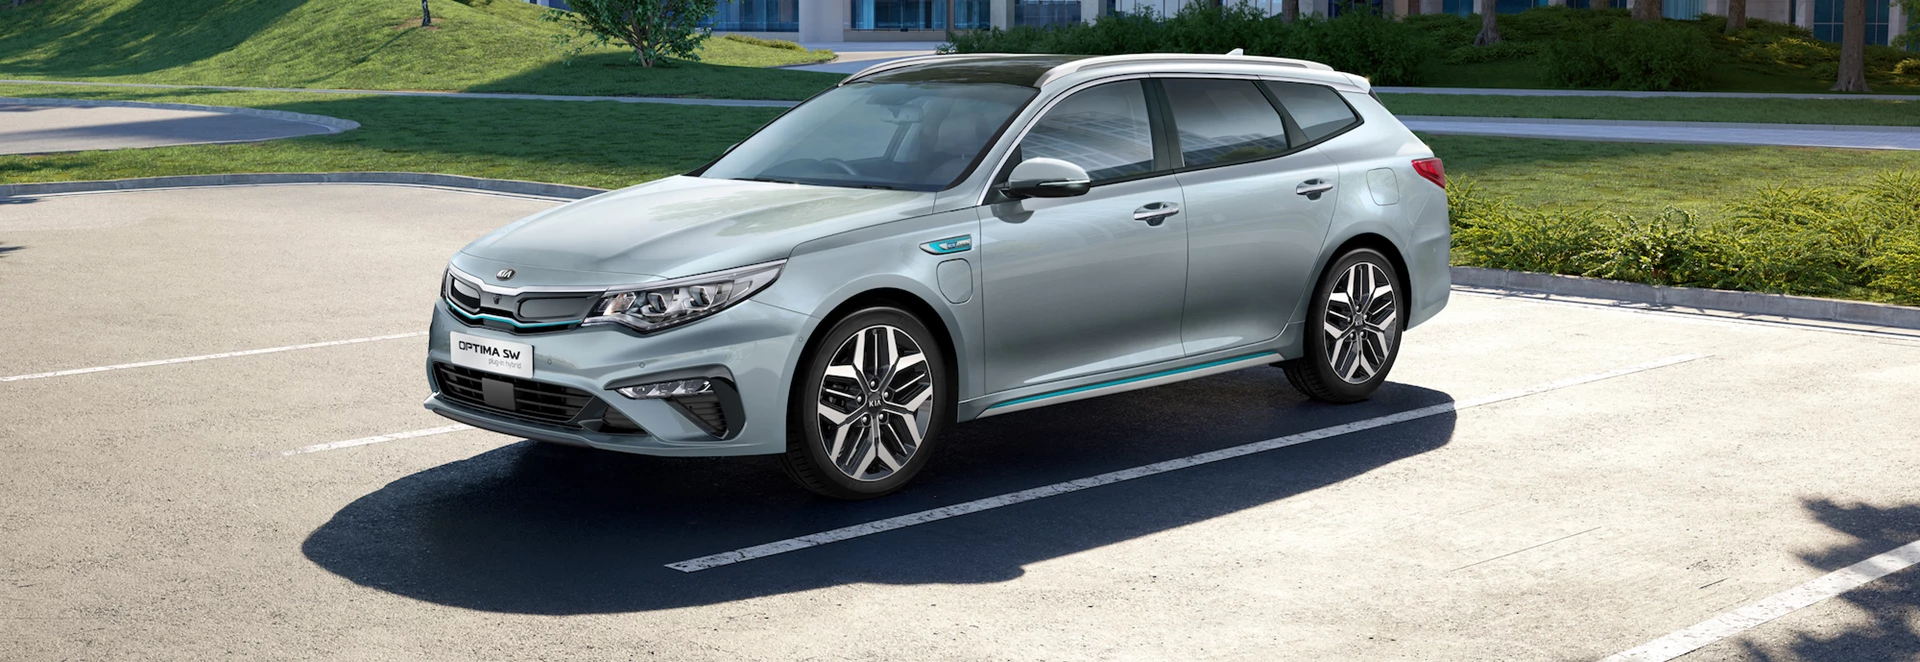 Kia releases pricing for updated Optima Sportswagon PHEV